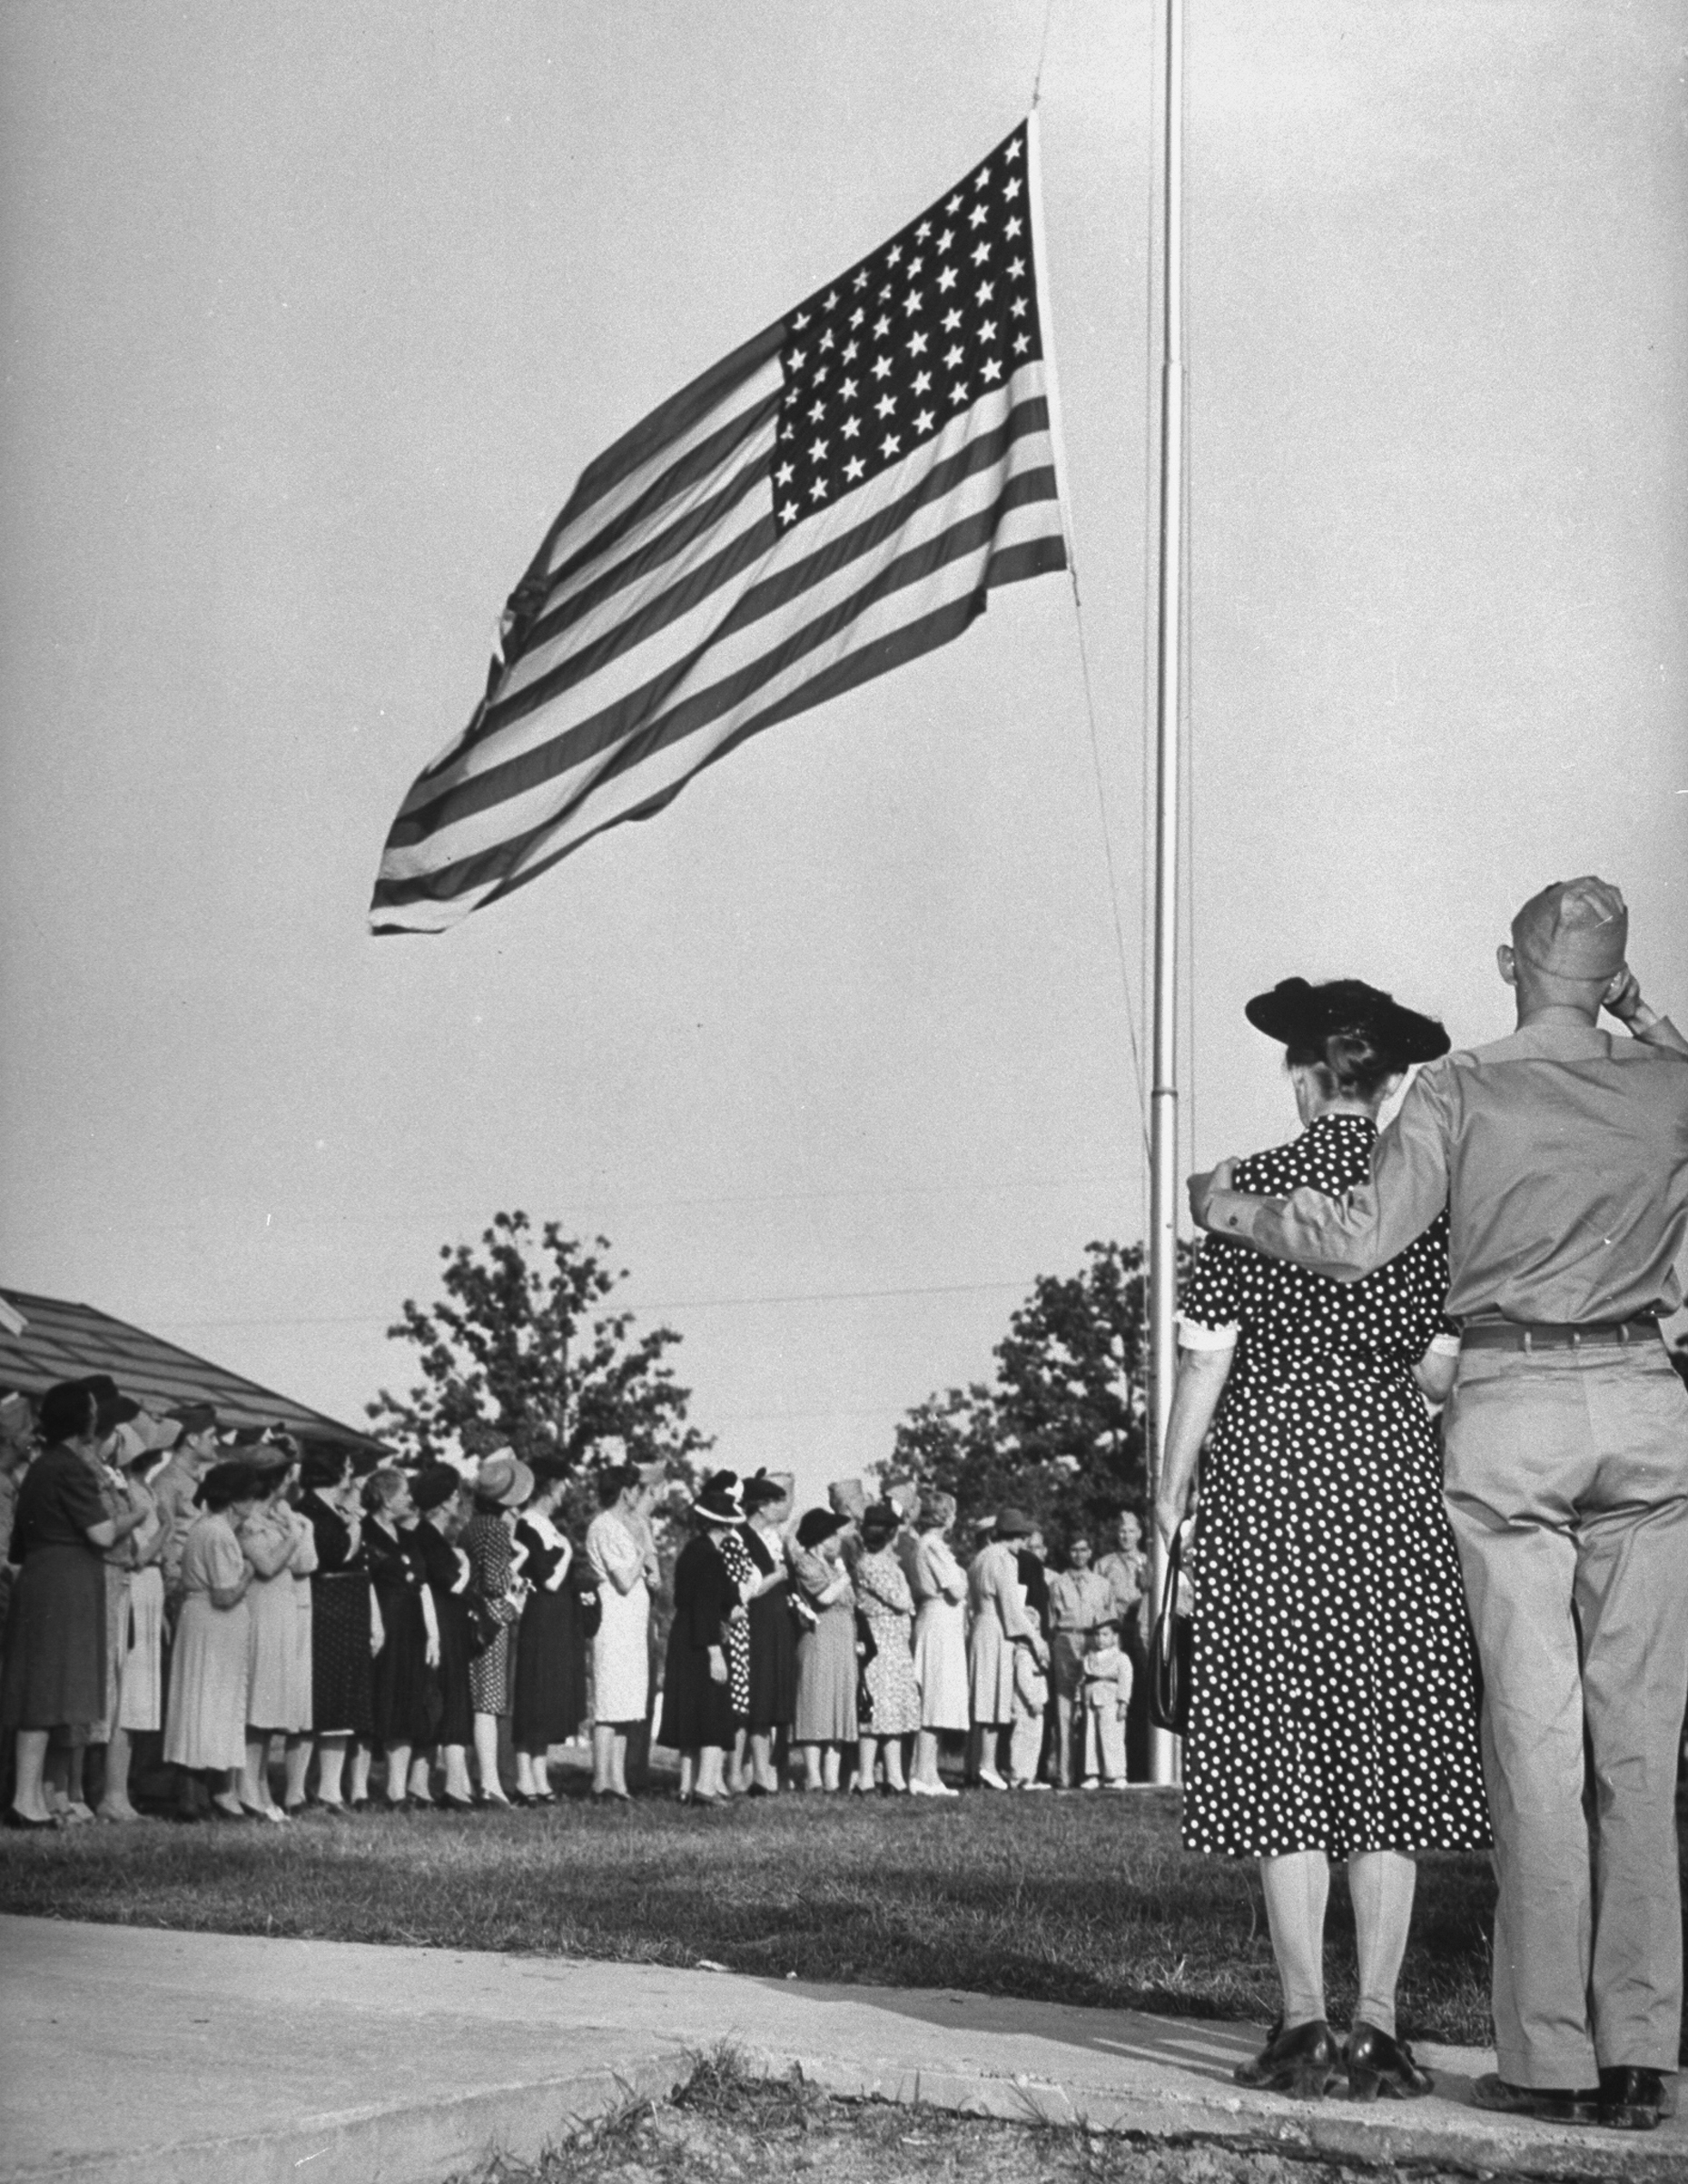 Mothers standing in line near the American flag during the crowing ceremonies of Mother's Day on a U.S. Army base. 1942. (William C. Shrout—The LIFE Picture Collection/Getty Images)